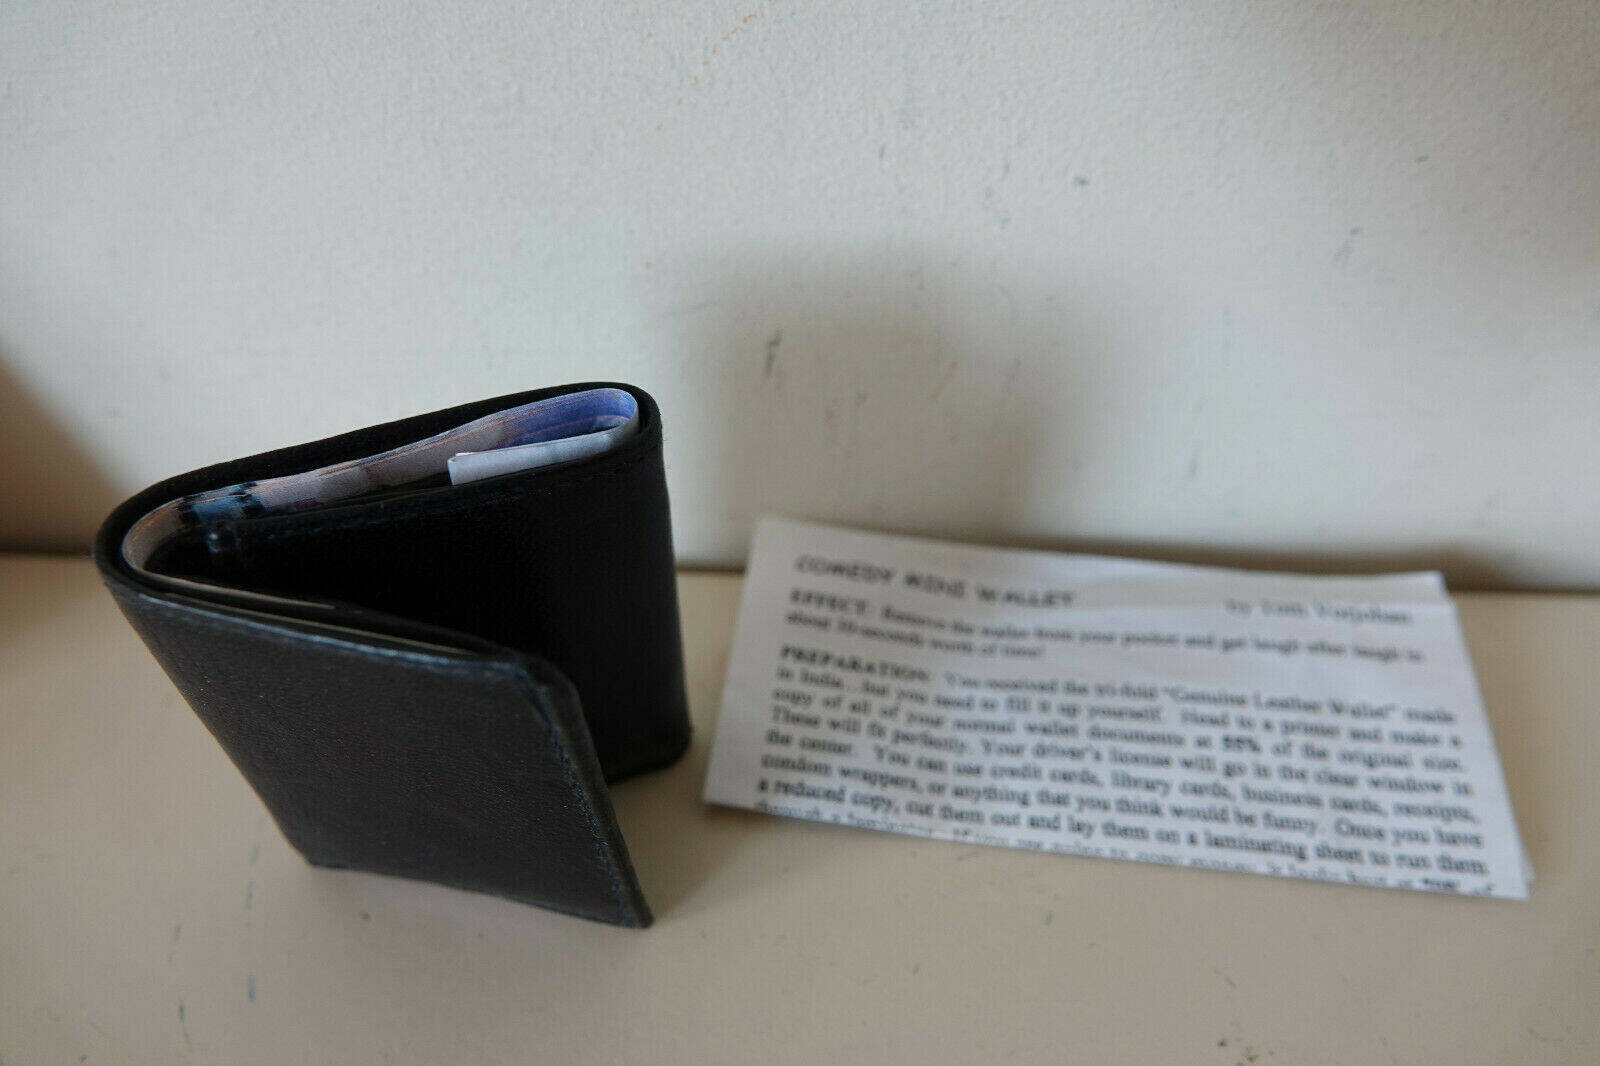 Comedy Mini Wallet by Tom Vorjohan closed next to instructions